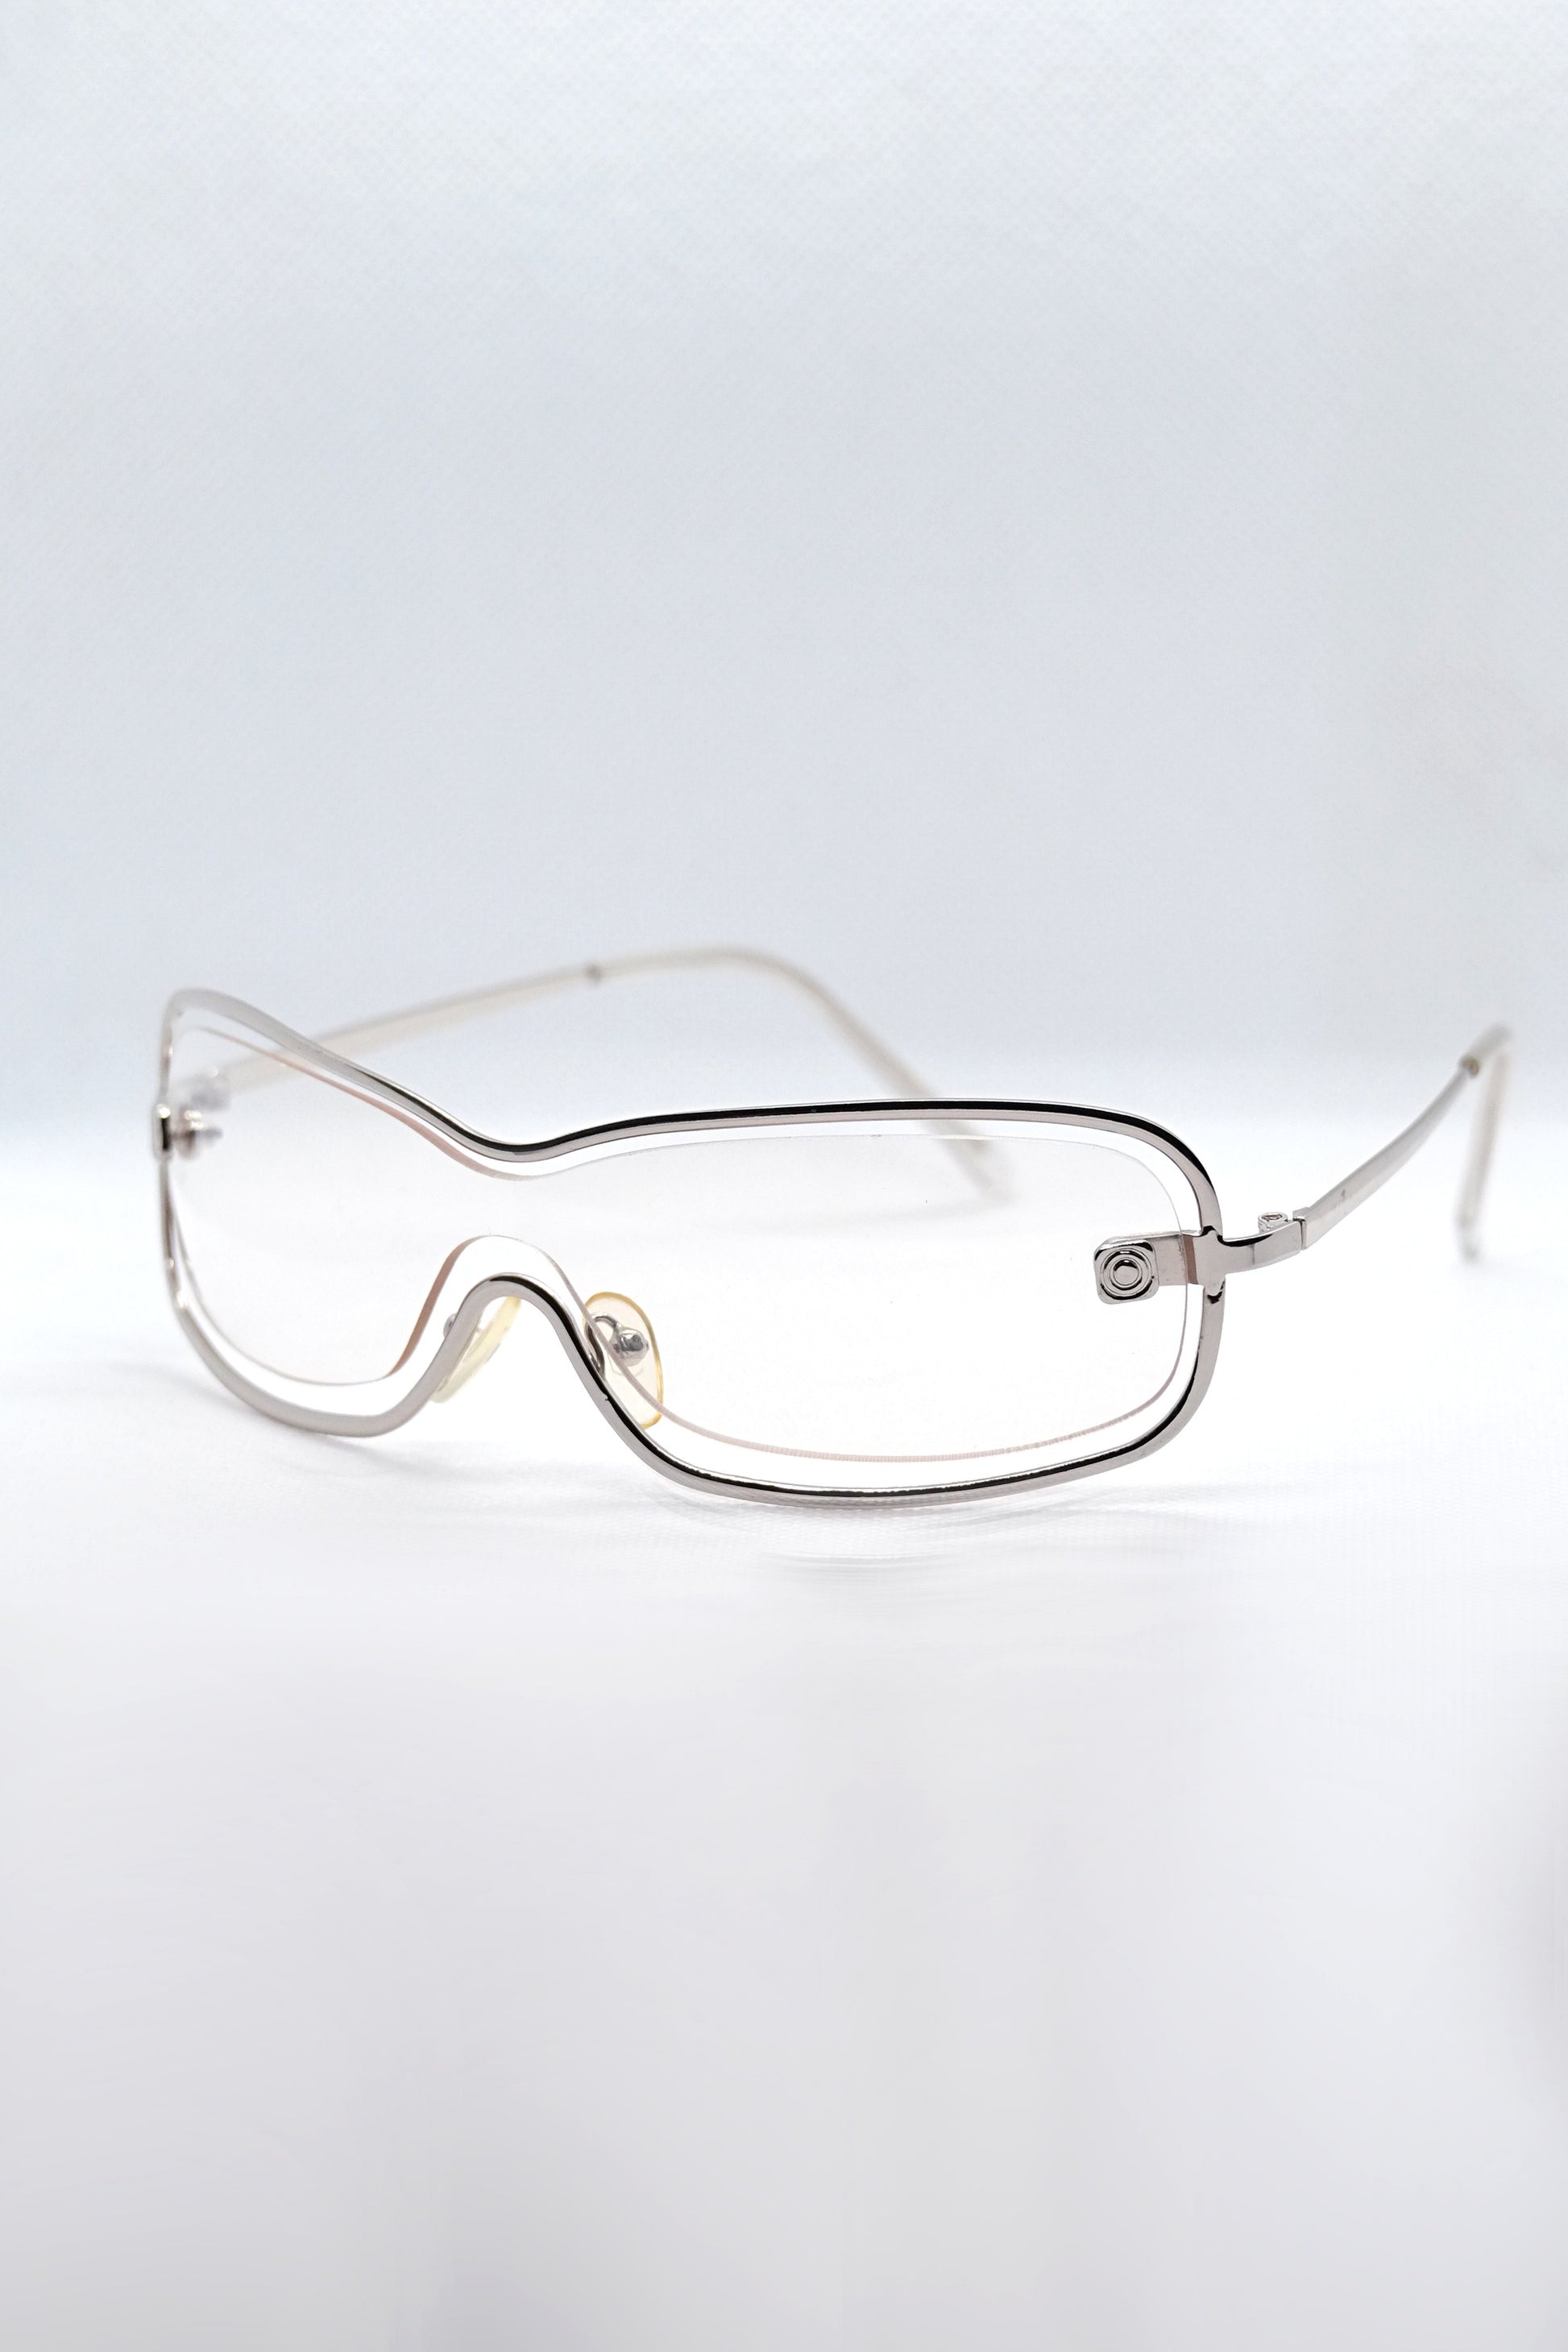 Vintage Chanel Clear Sunglasses 2000s Glasses S